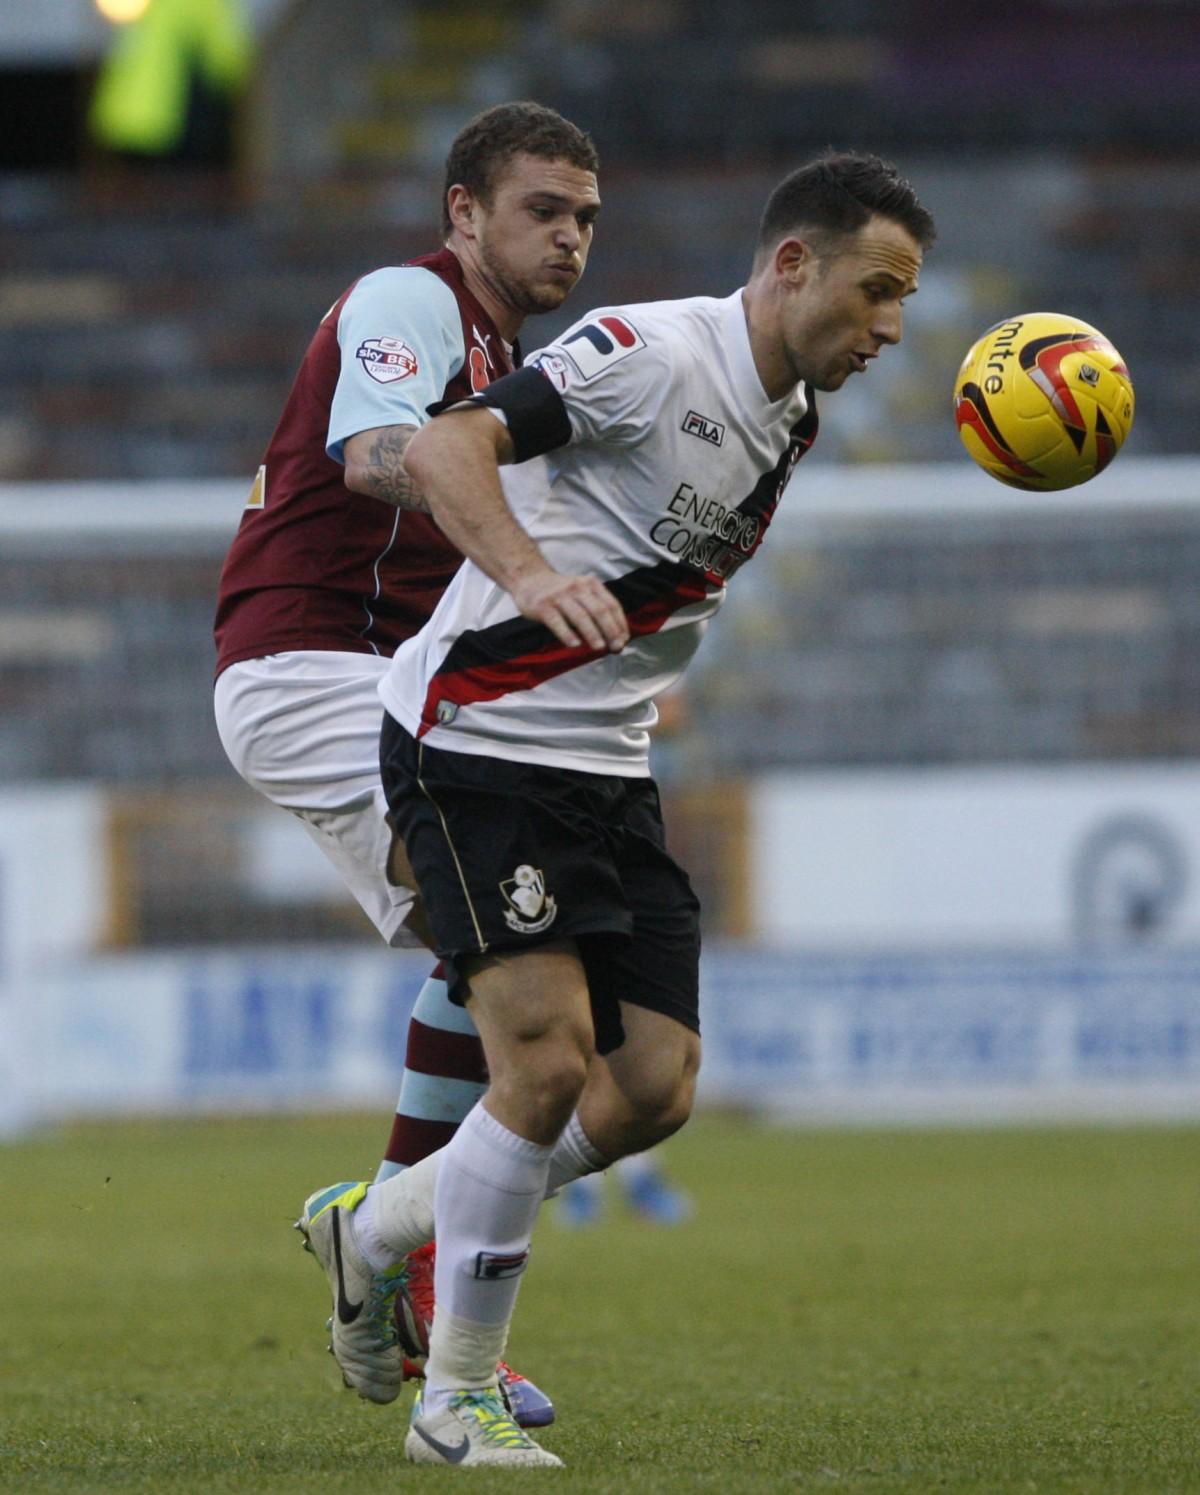 Picturesfrom Burnley v AFC Bournemouth at Turf Moor on 9th November, 2013